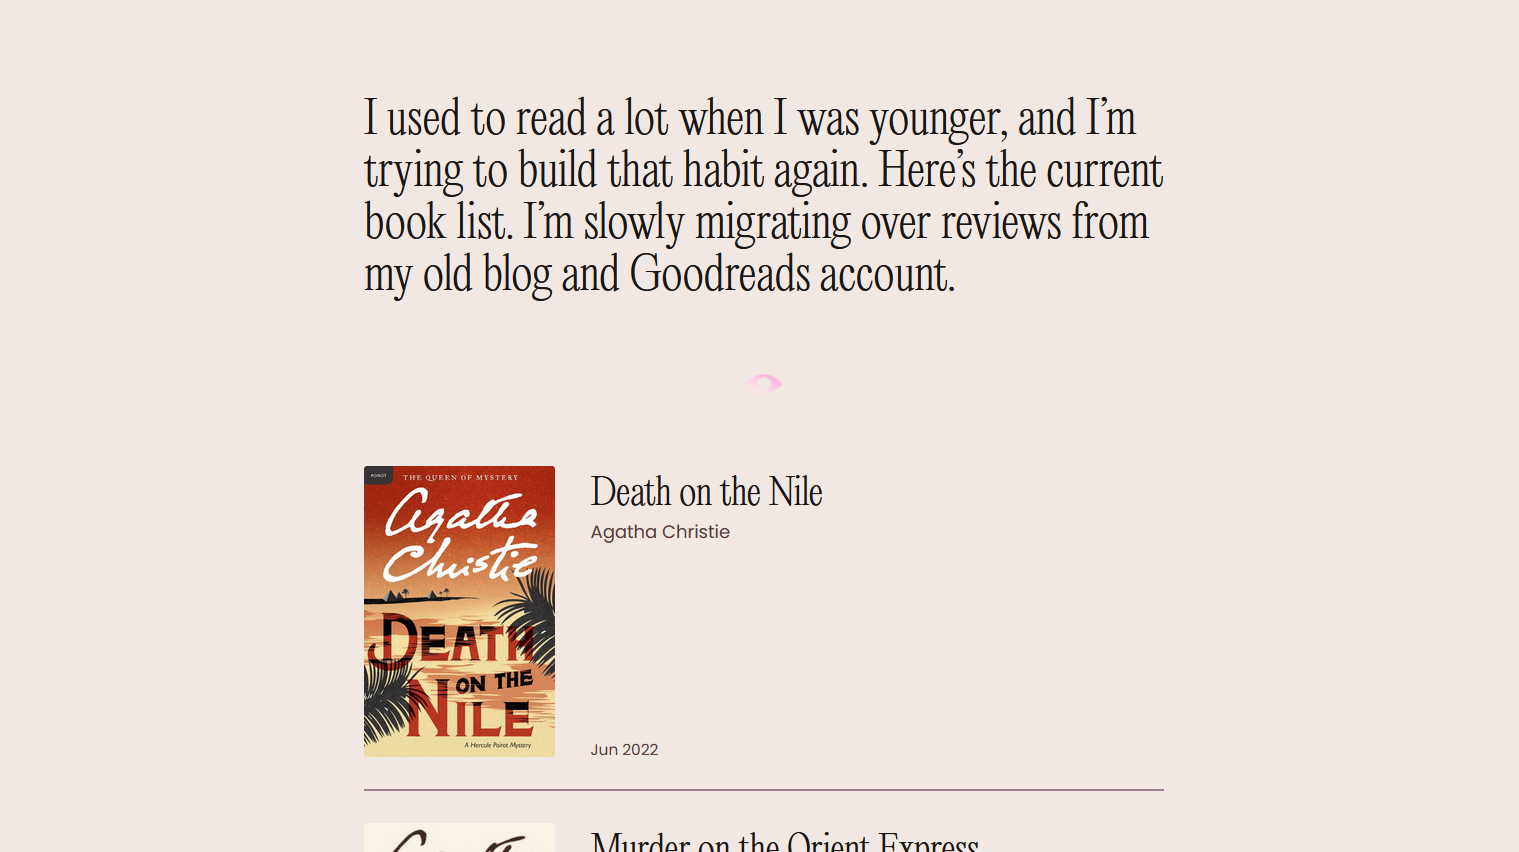 My reading list page, showing a short description at the top in big text and a listing of my latest read book.